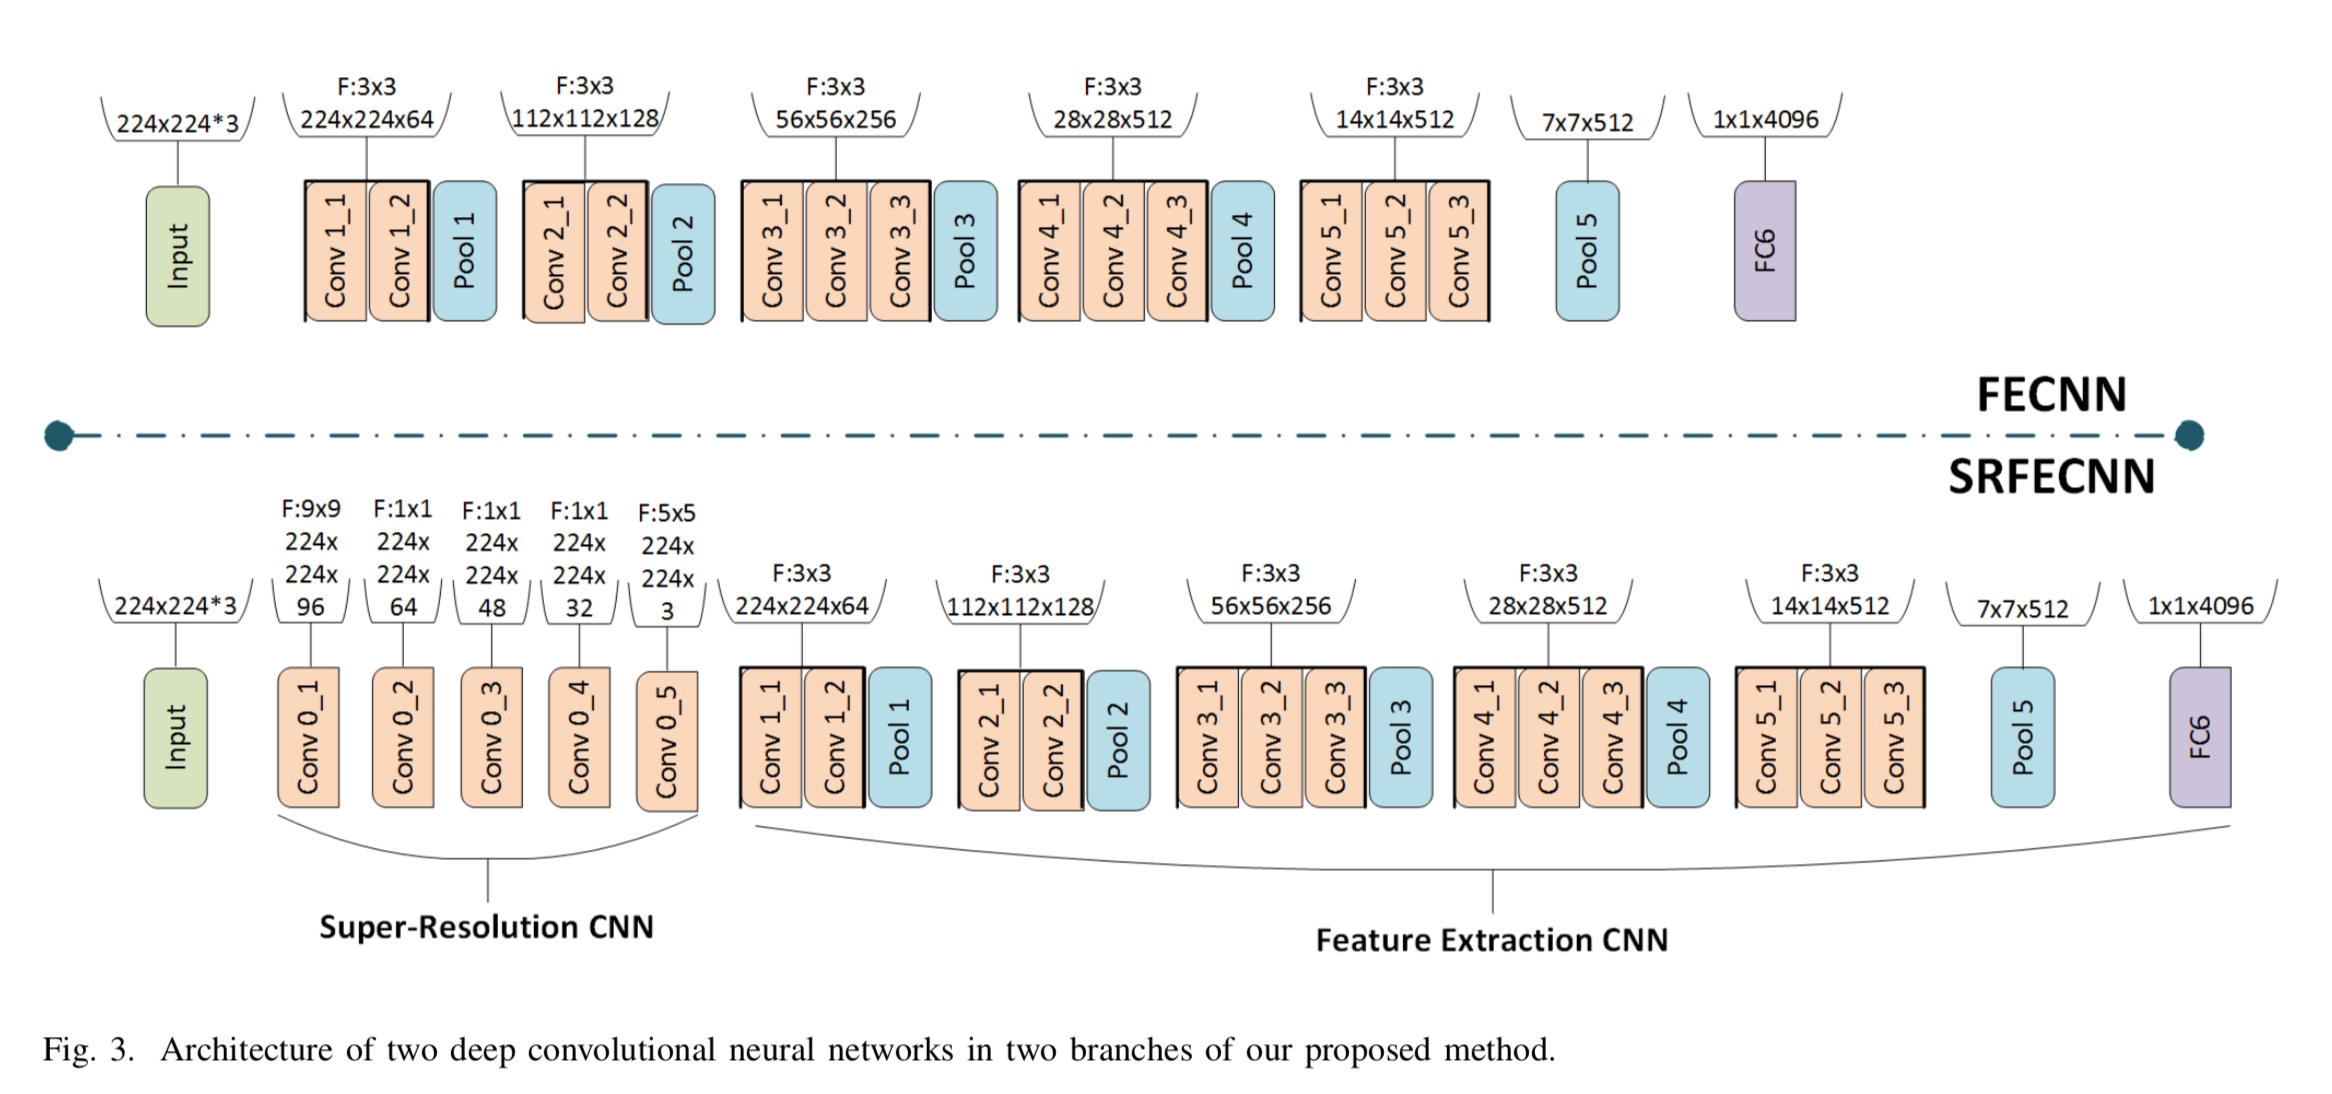 Architecture of two deep convolutional neural networks in two branches